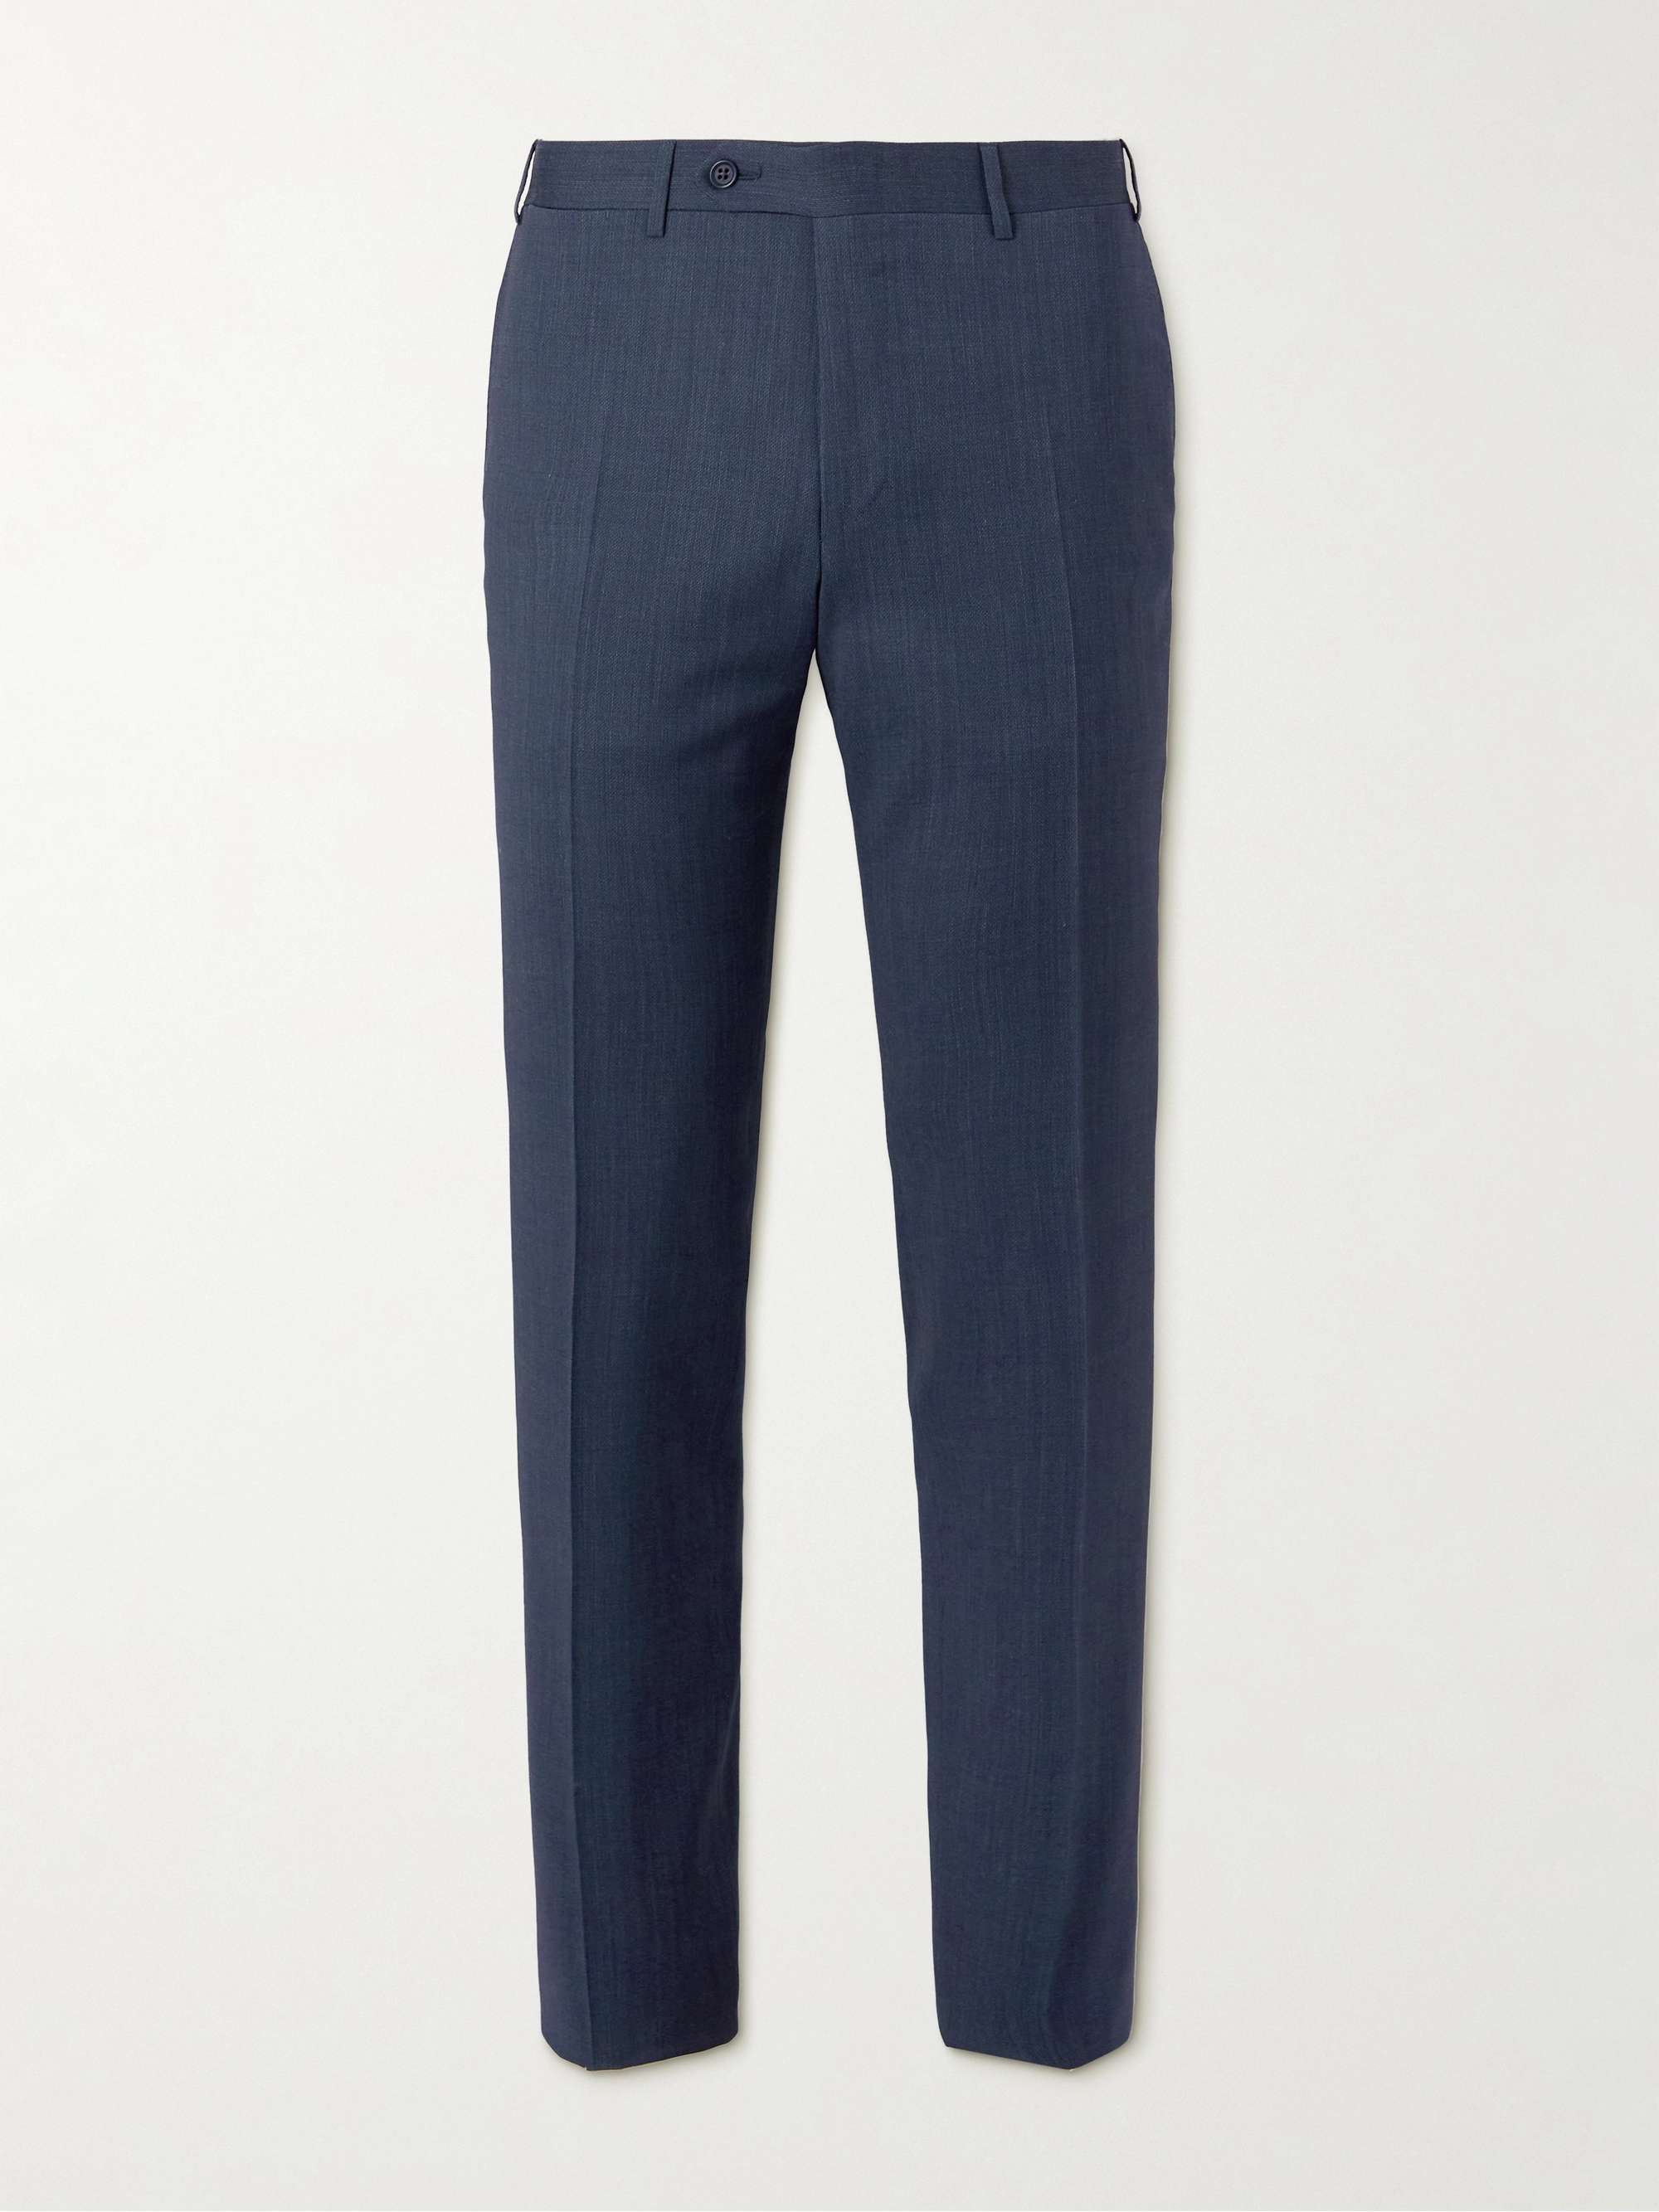 CANALI Slim-Fit Straight-Leg Wool Suit Trousers for Men